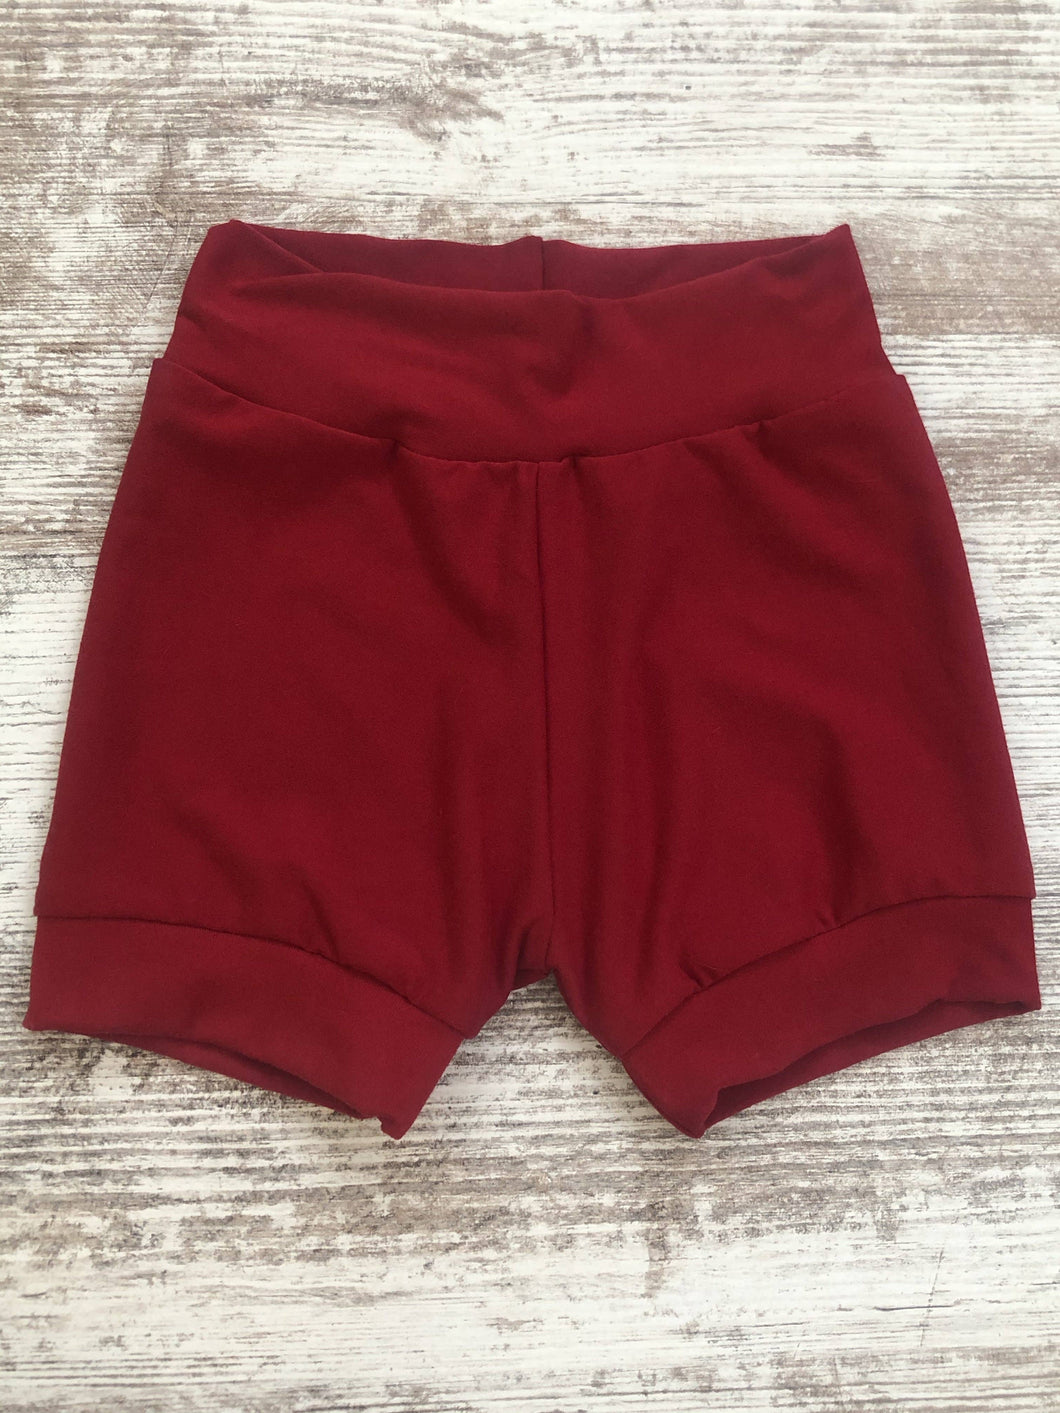 Jena Bug Baby Boutique - Rose Red Shorties